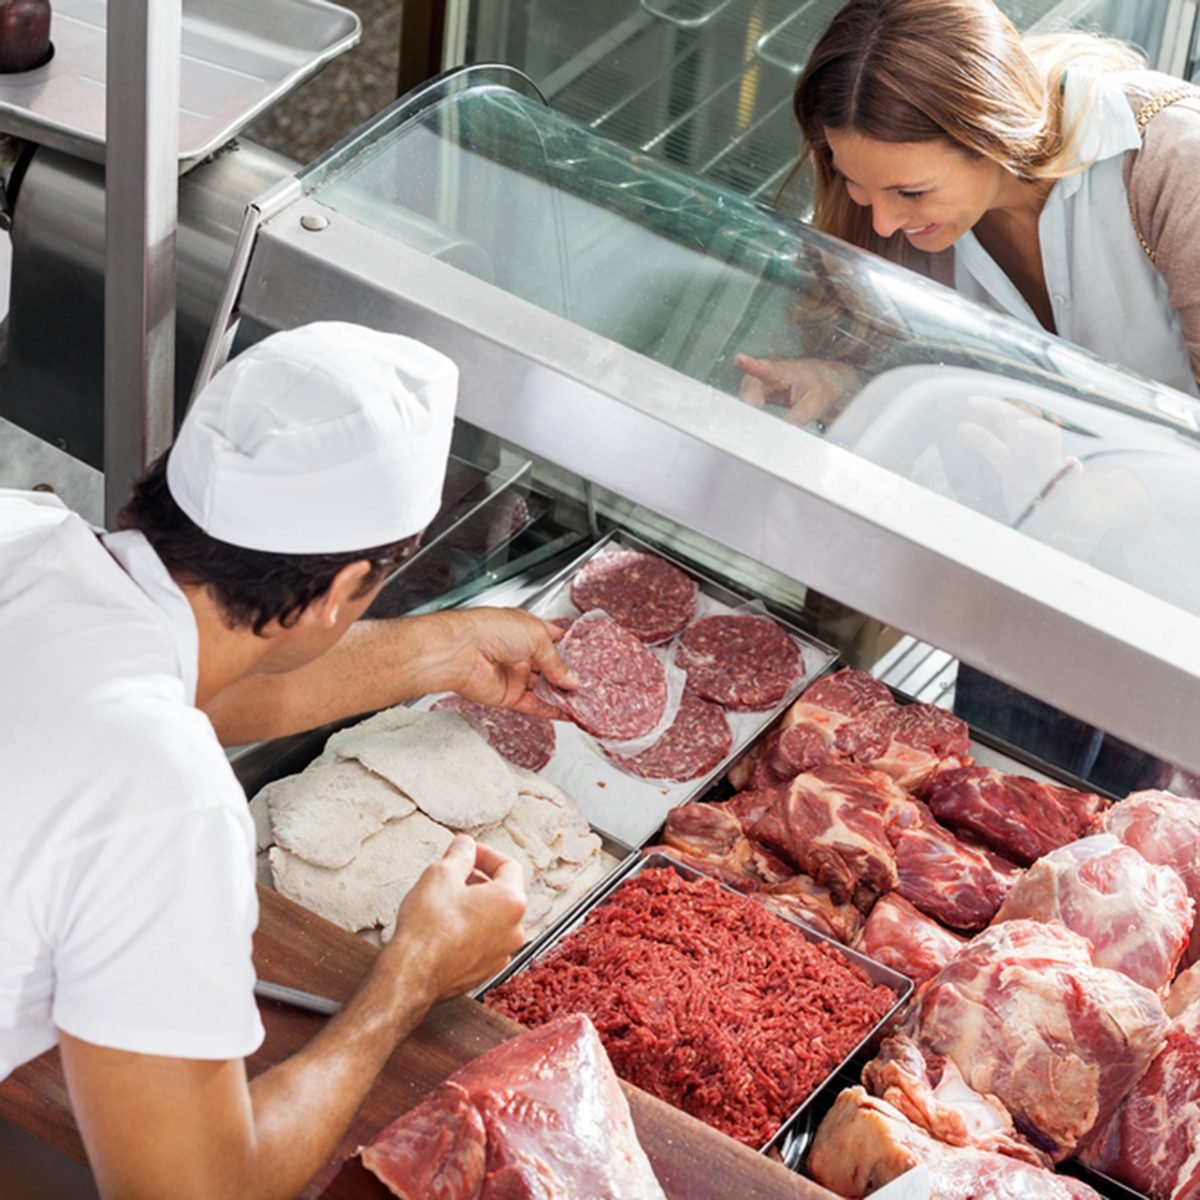 6 Things You Should Never Do at a Butcher Shop